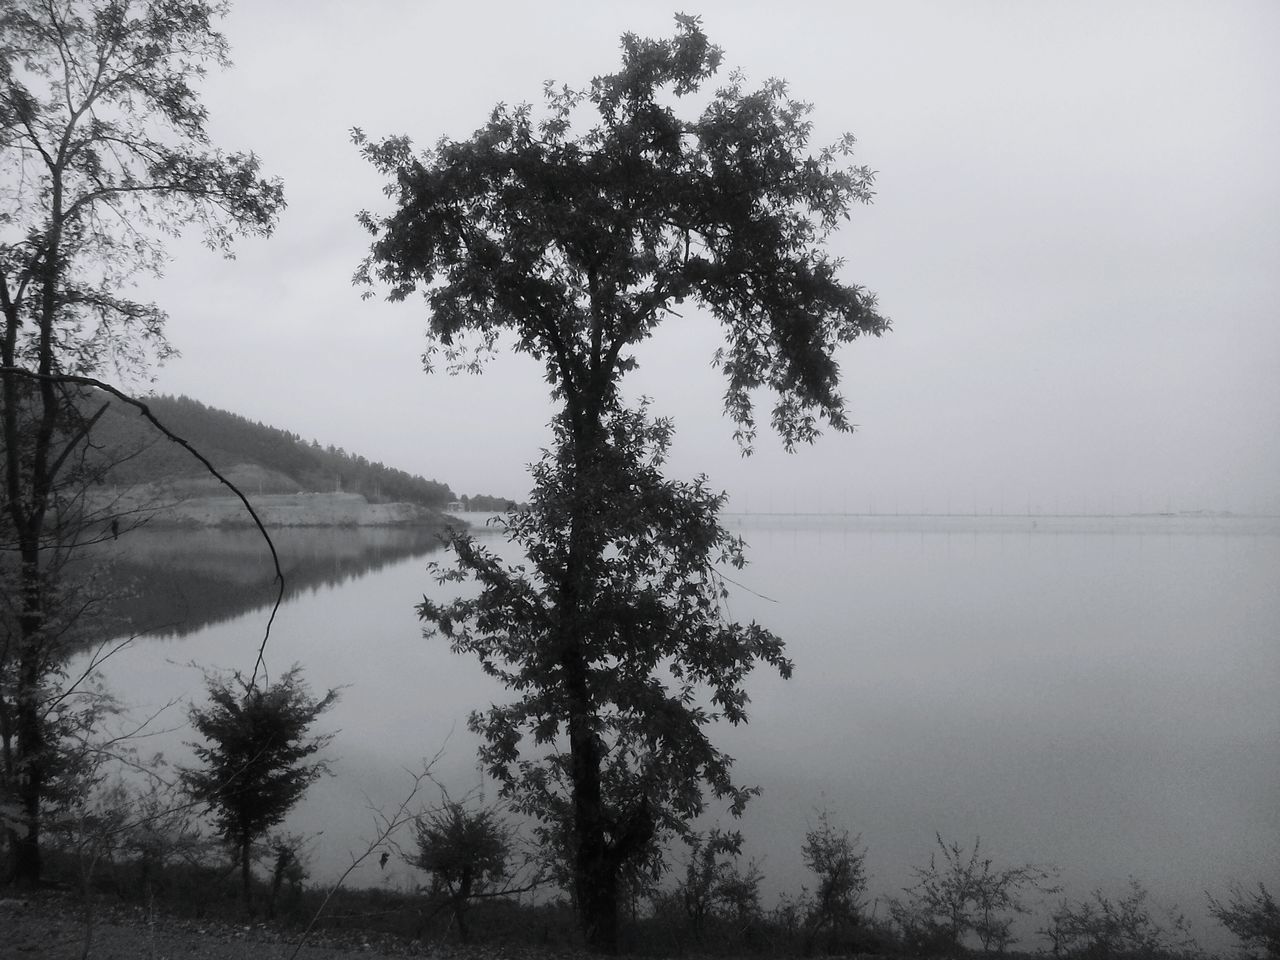 tranquil scene, tranquility, water, tree, lake, scenics, beauty in nature, nature, fog, reflection, silhouette, sky, idyllic, branch, non-urban scene, growth, foggy, calm, river